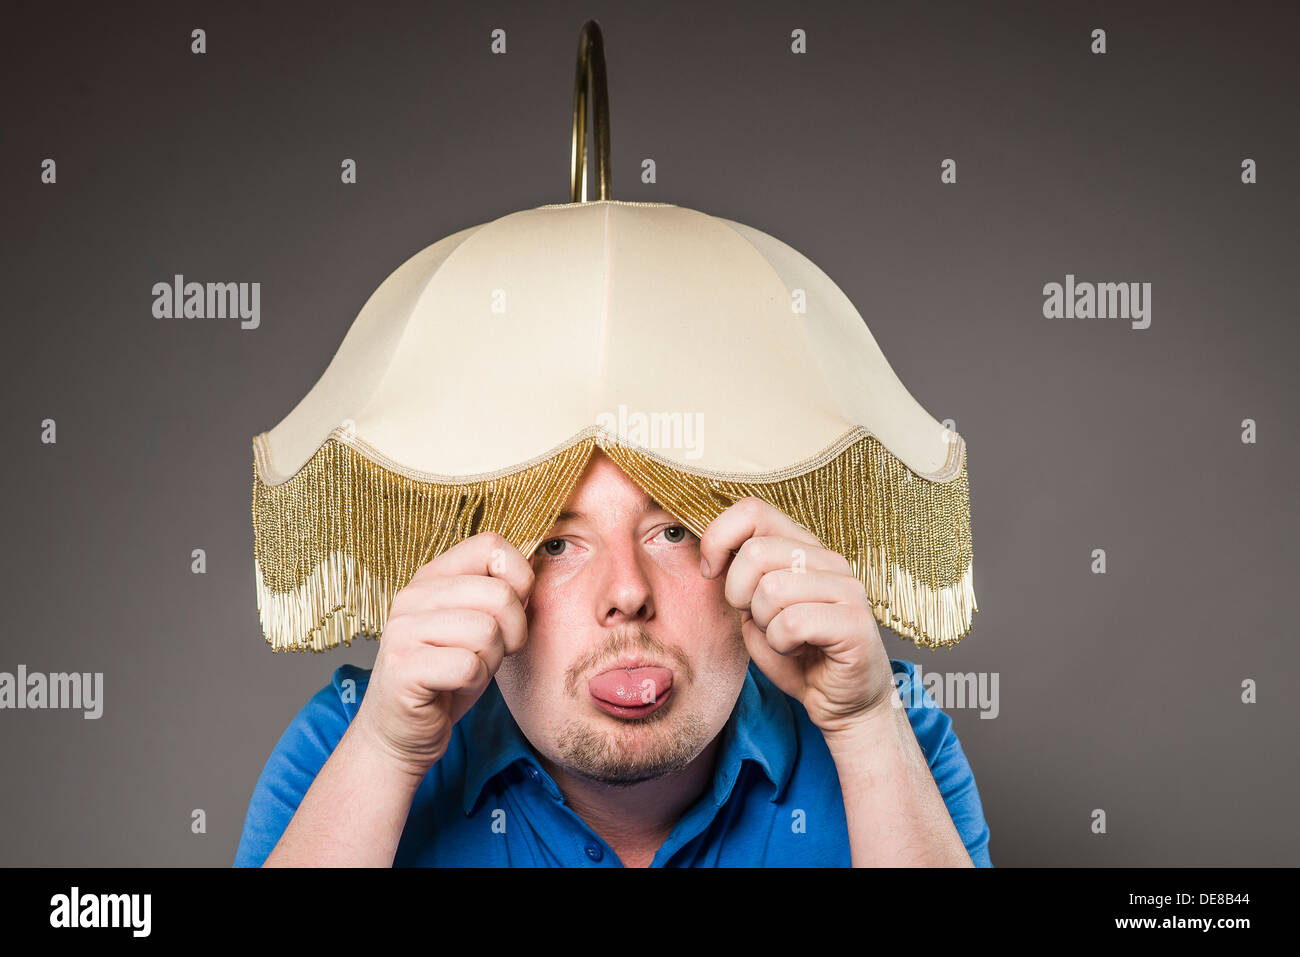 Portrait of mid adult man with electric lamp, close up Stock Photo